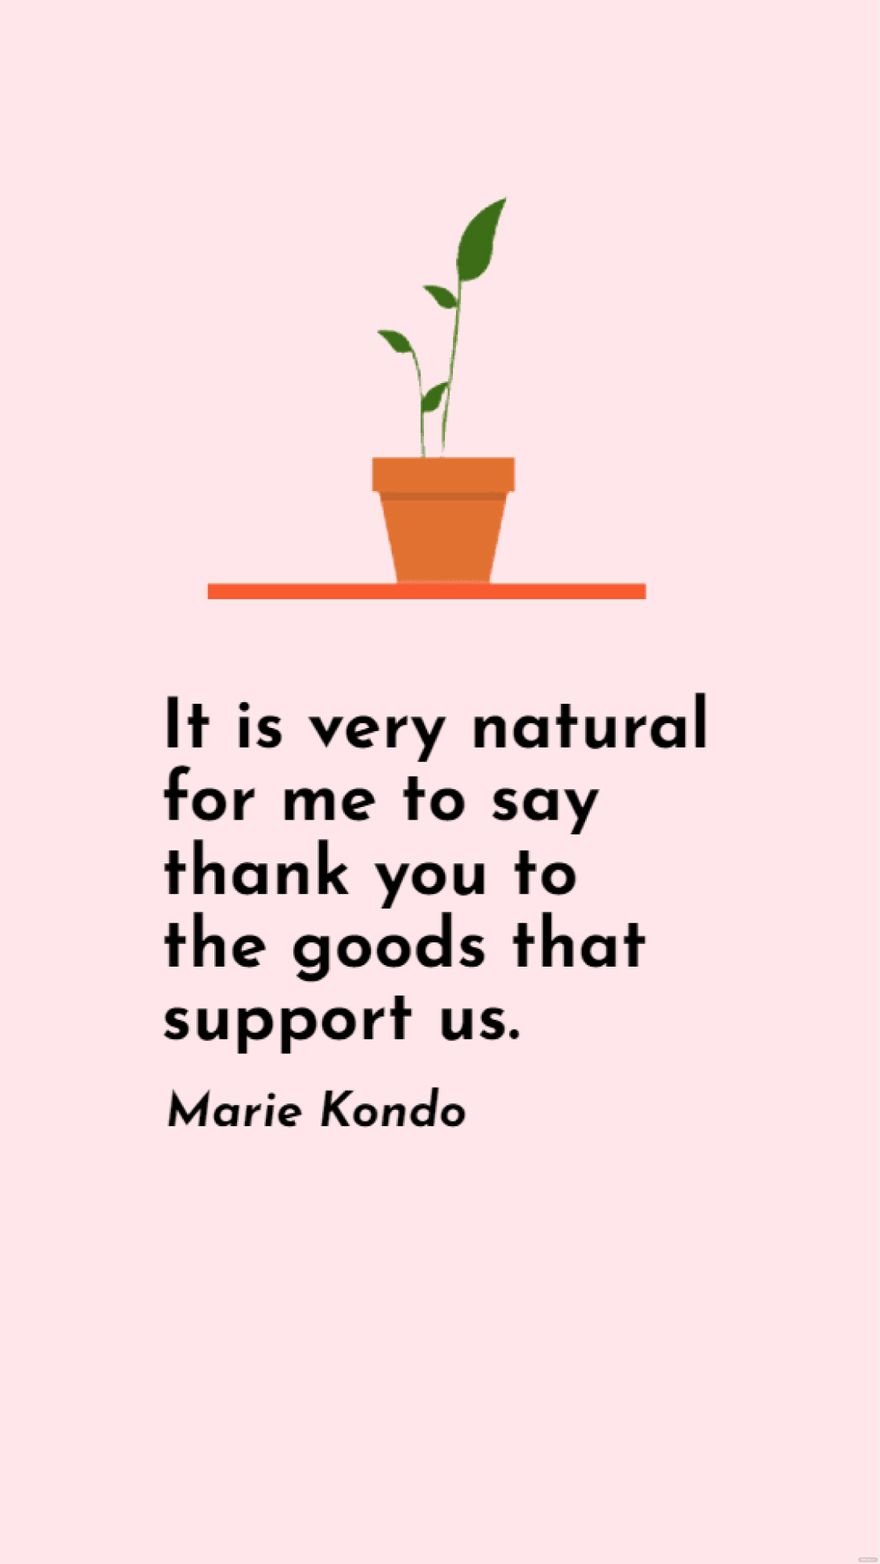 Free Marie Kondo - It is very natural for me to say thank you to the goods that support us.